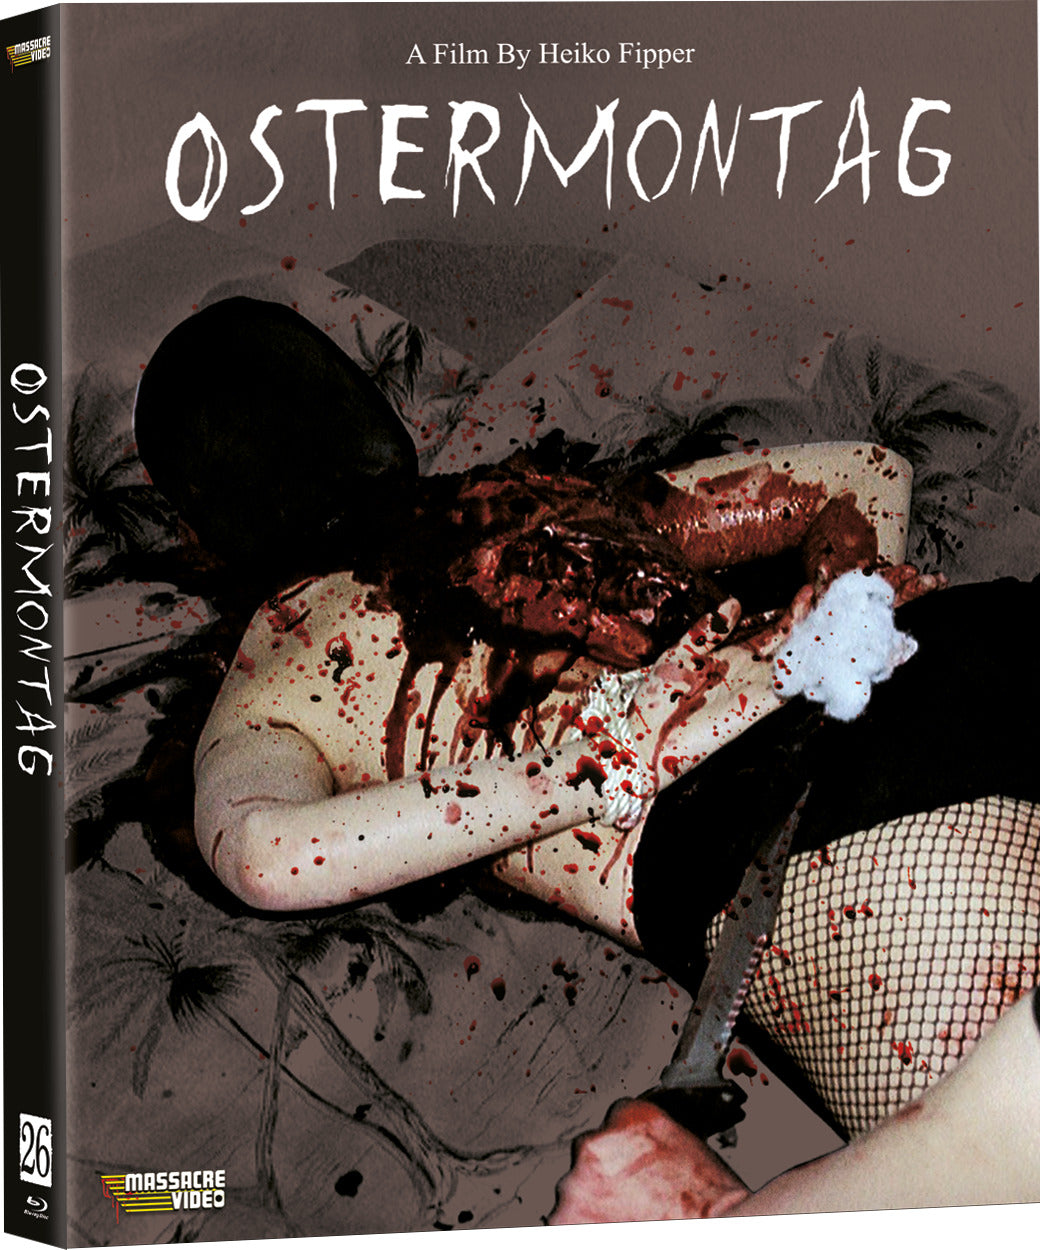 Ostermontag - front cover